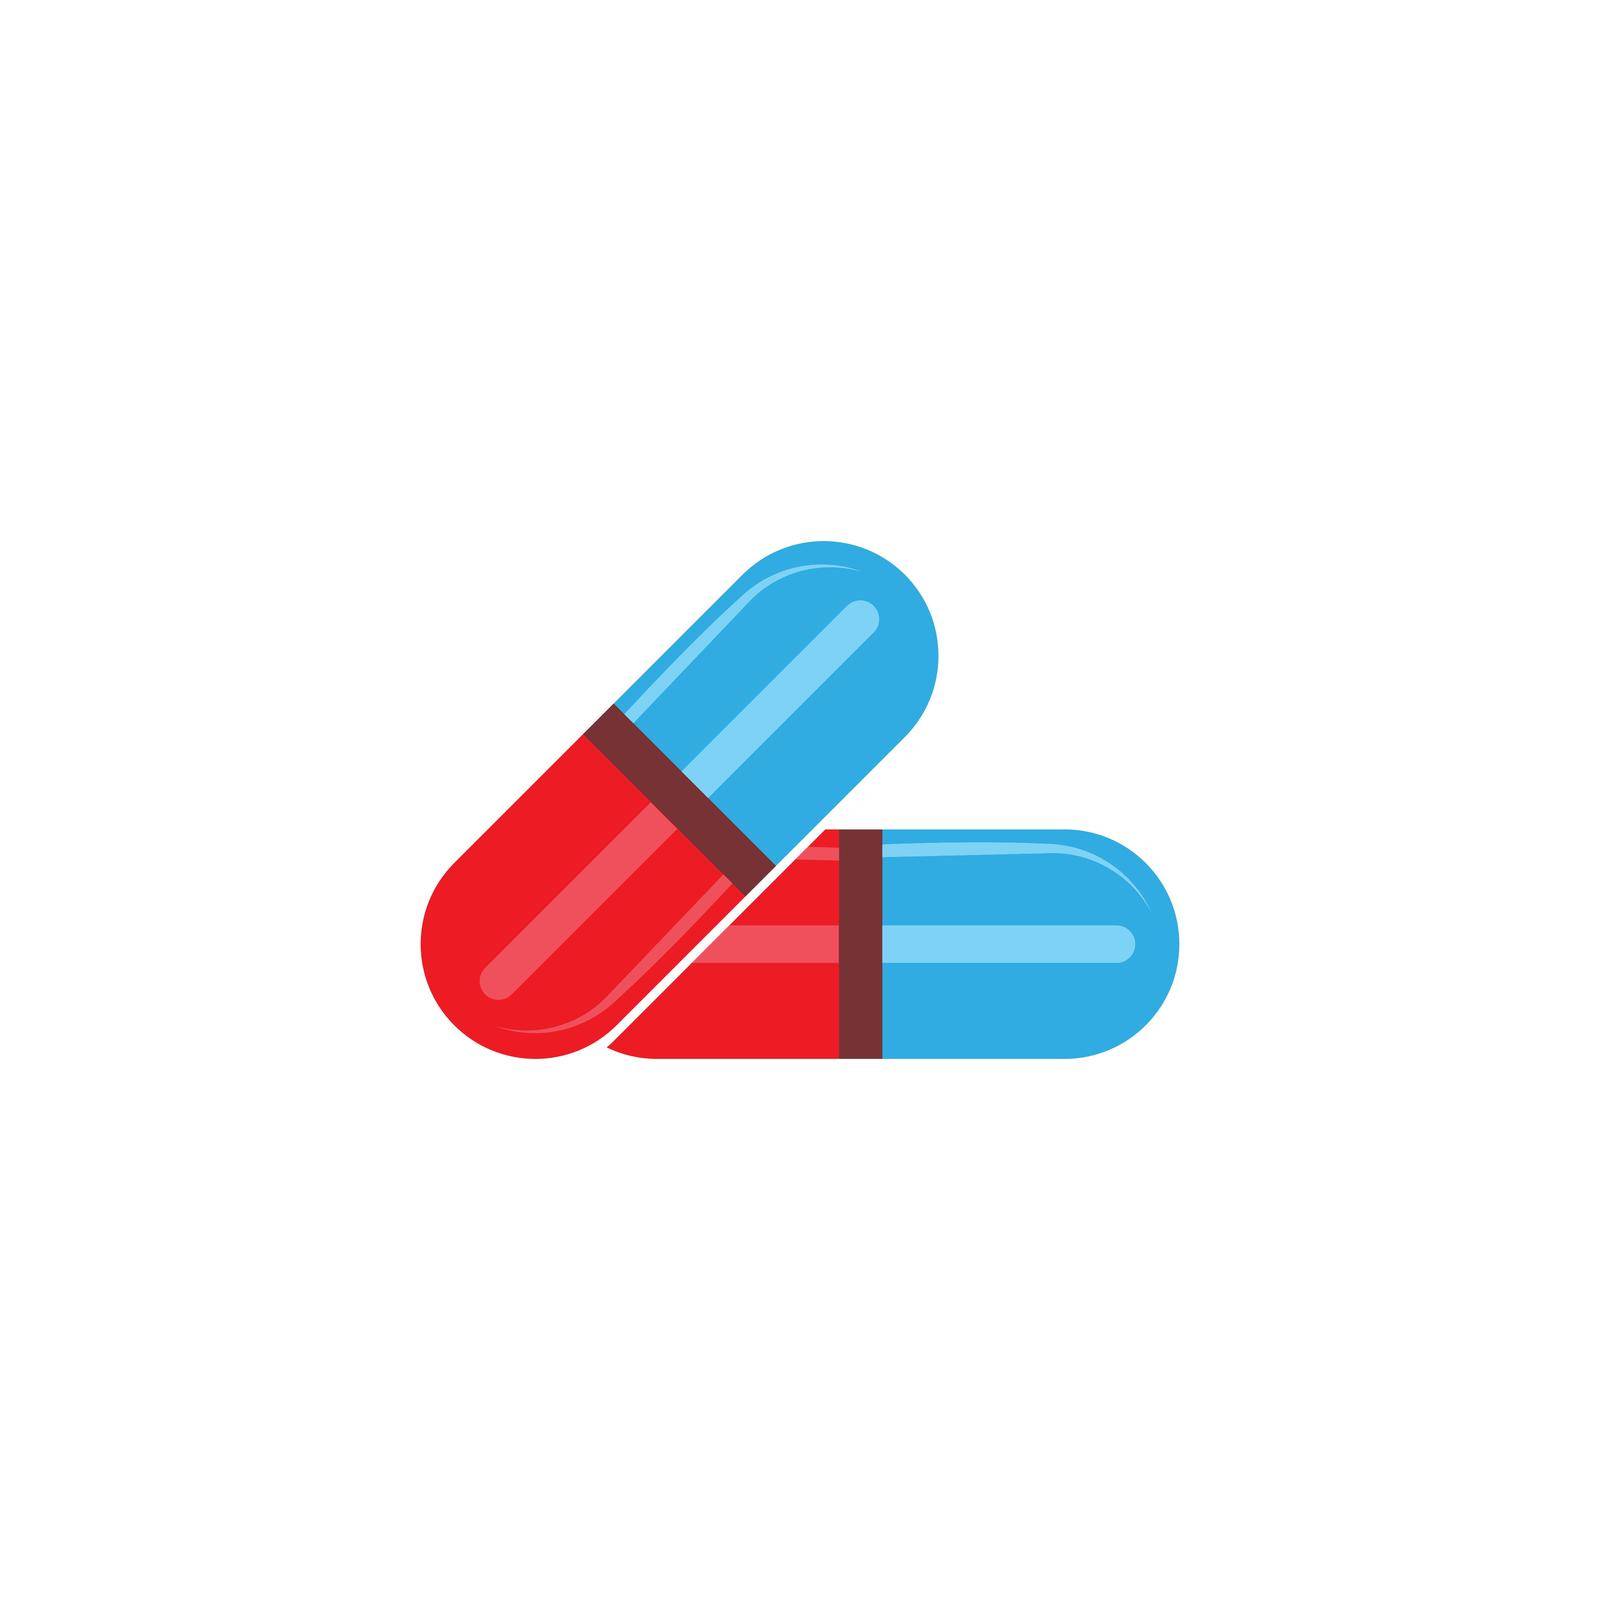 Pill illustration by awk